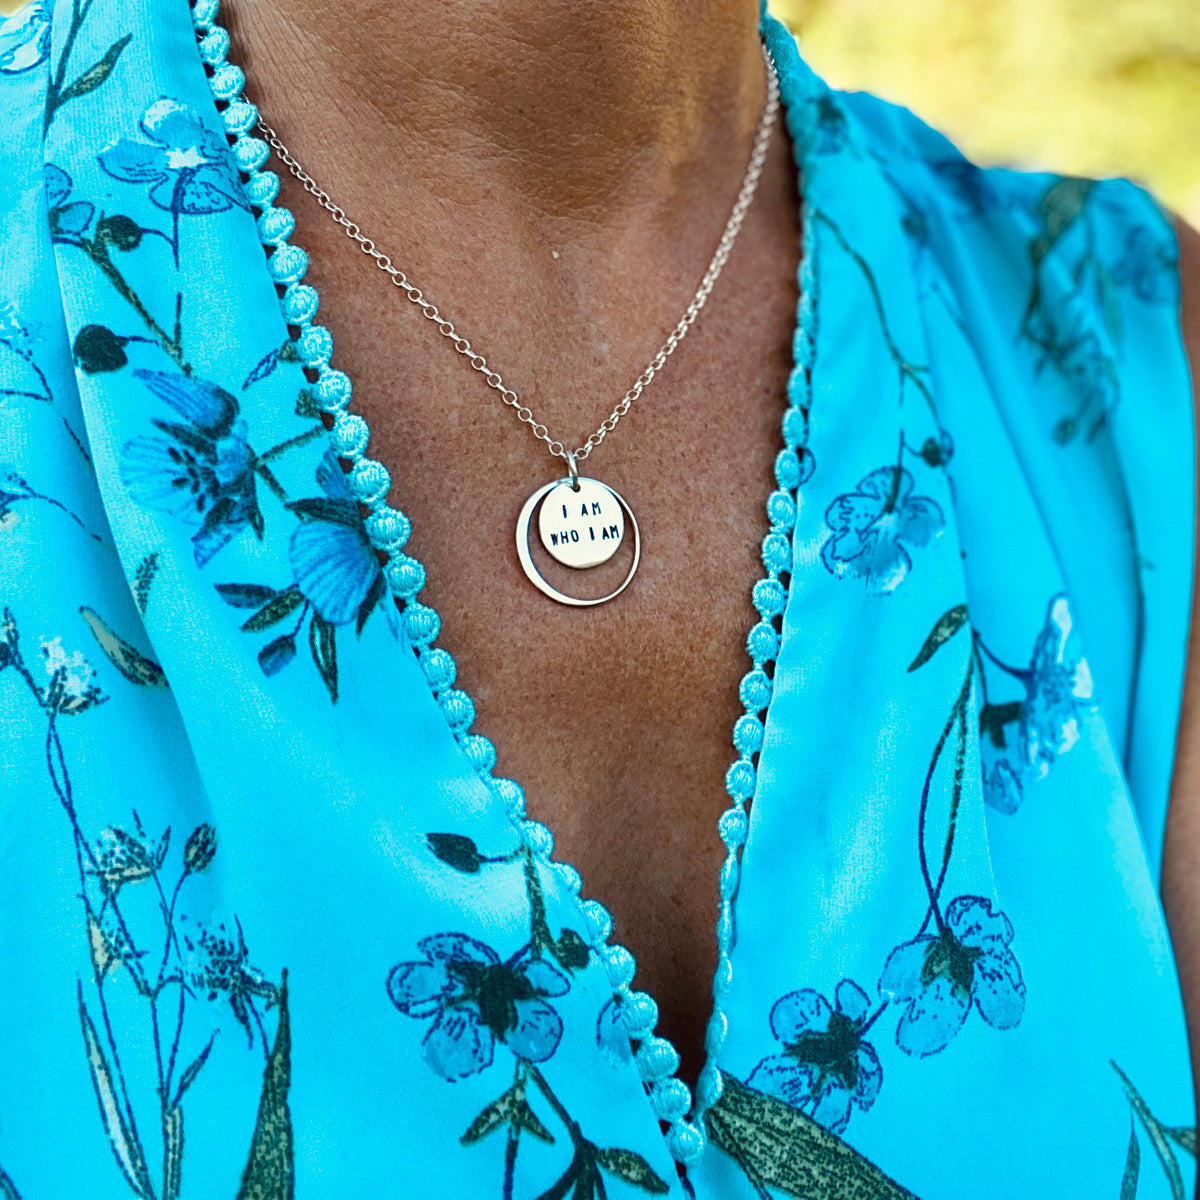 I am who I am - Sterling Silver Affirmation Necklace. To be yourself in a world that is constantly trying to make you something else is the greatest accomplishment.